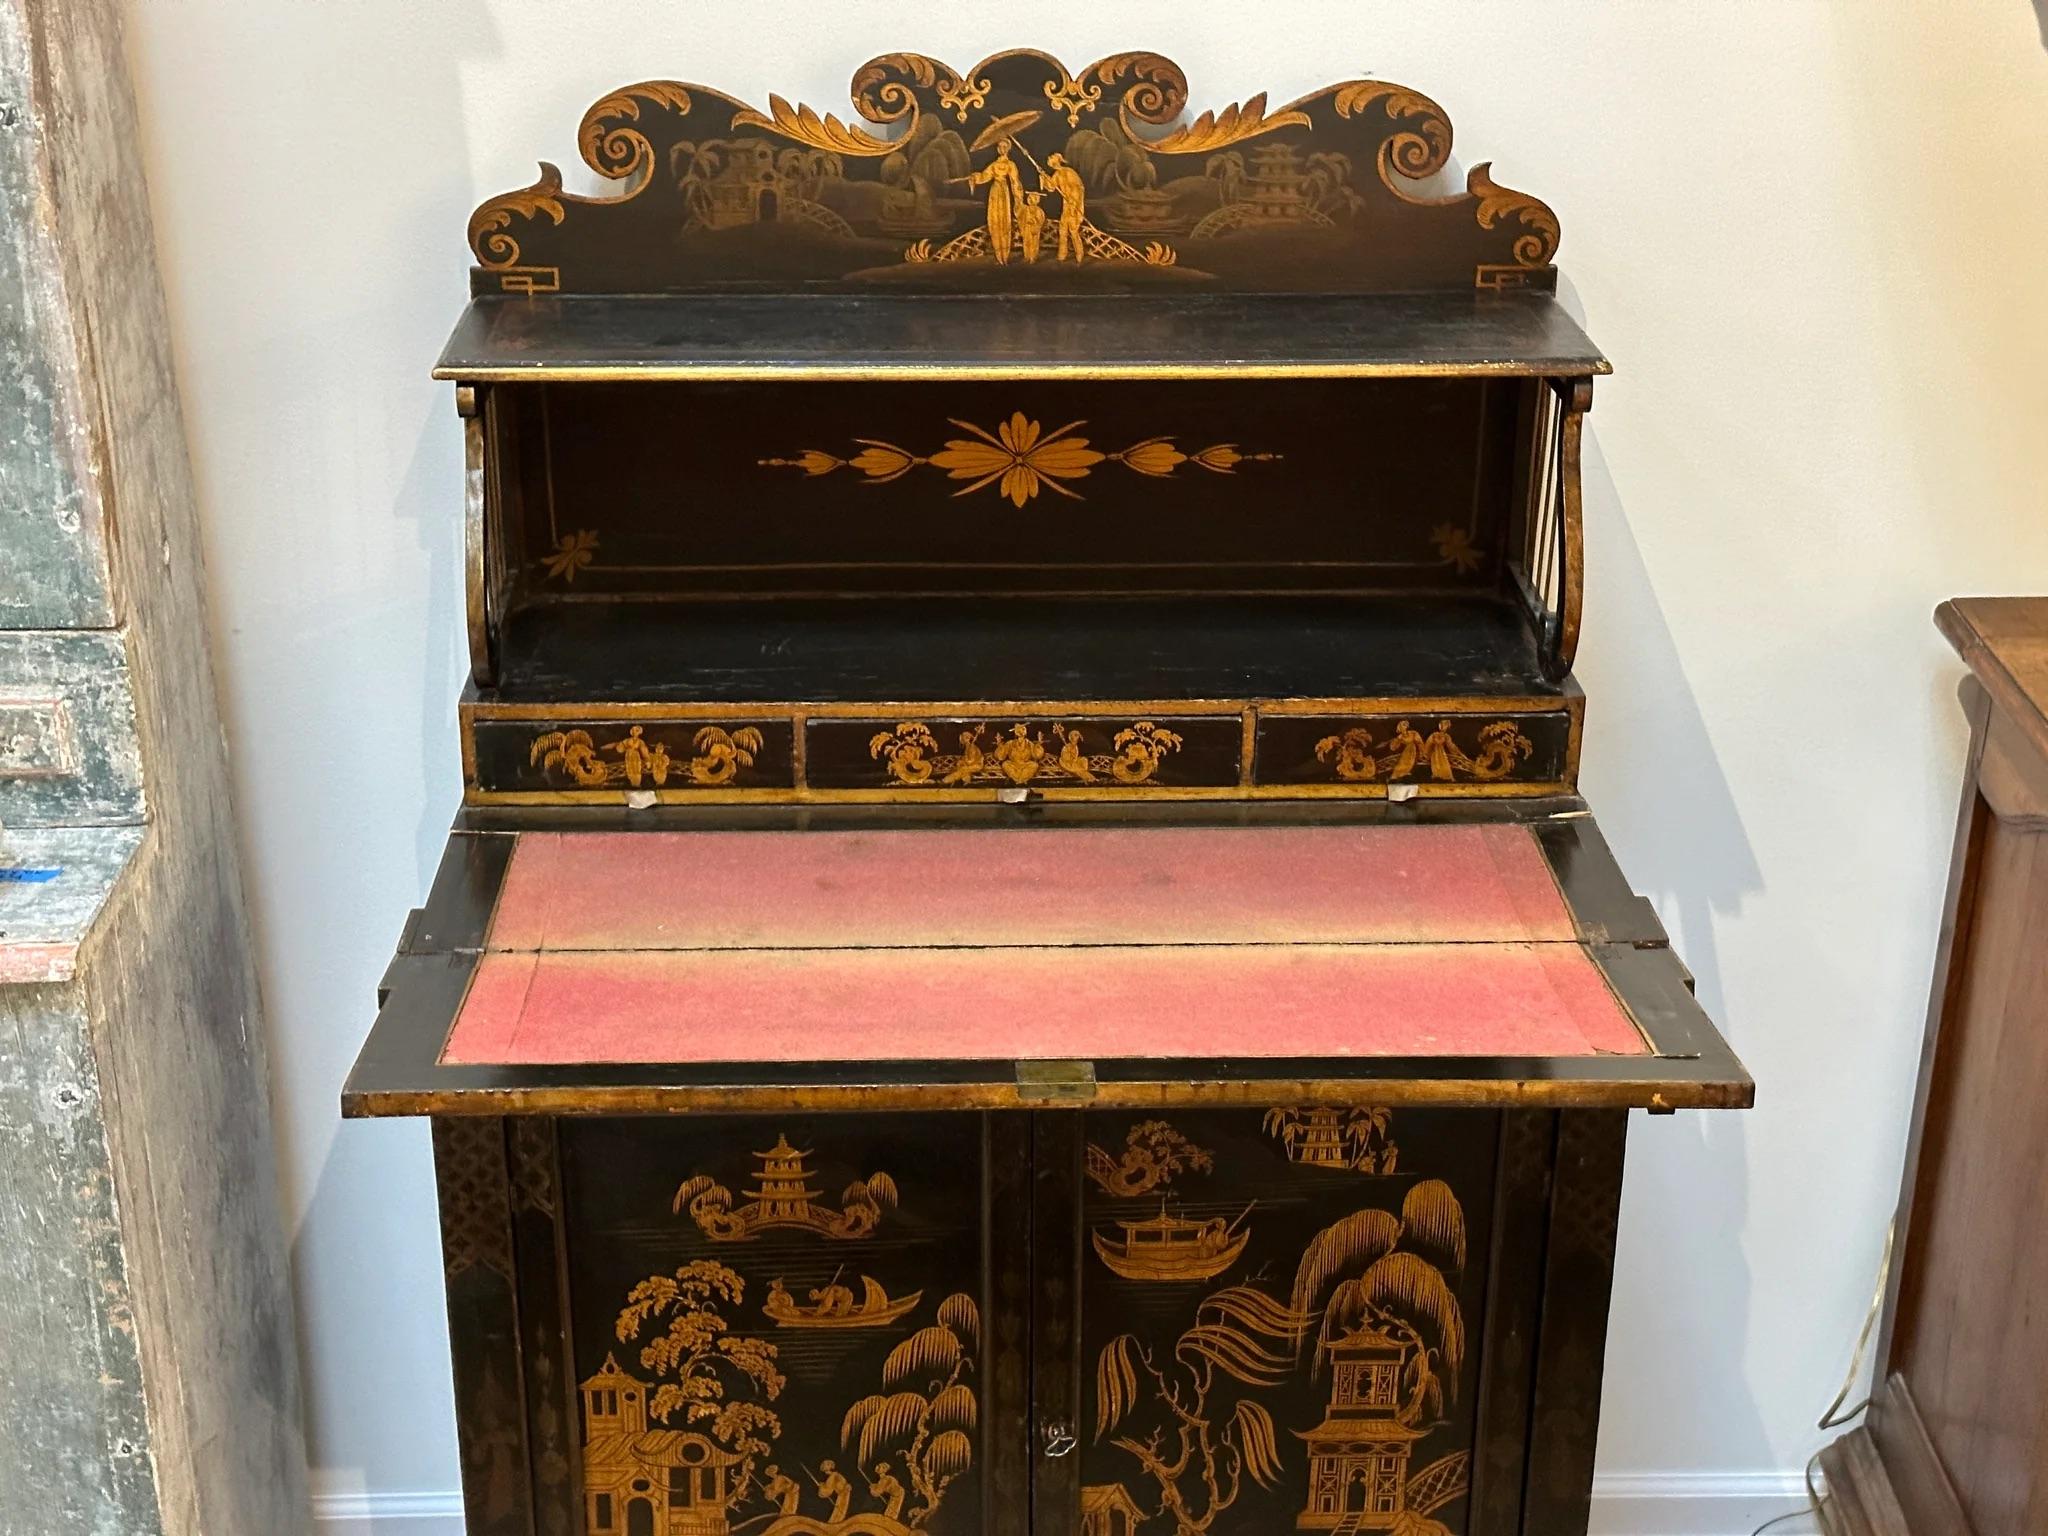 Regency Black Painted and Parcel-Gilt Chinoiserie Decorated Side Cabinet, from an installment by Colefax and Fowler.  In two parts, the top section having a shelf and three concealed drawers, the lower portion with a drop down writing surface over a